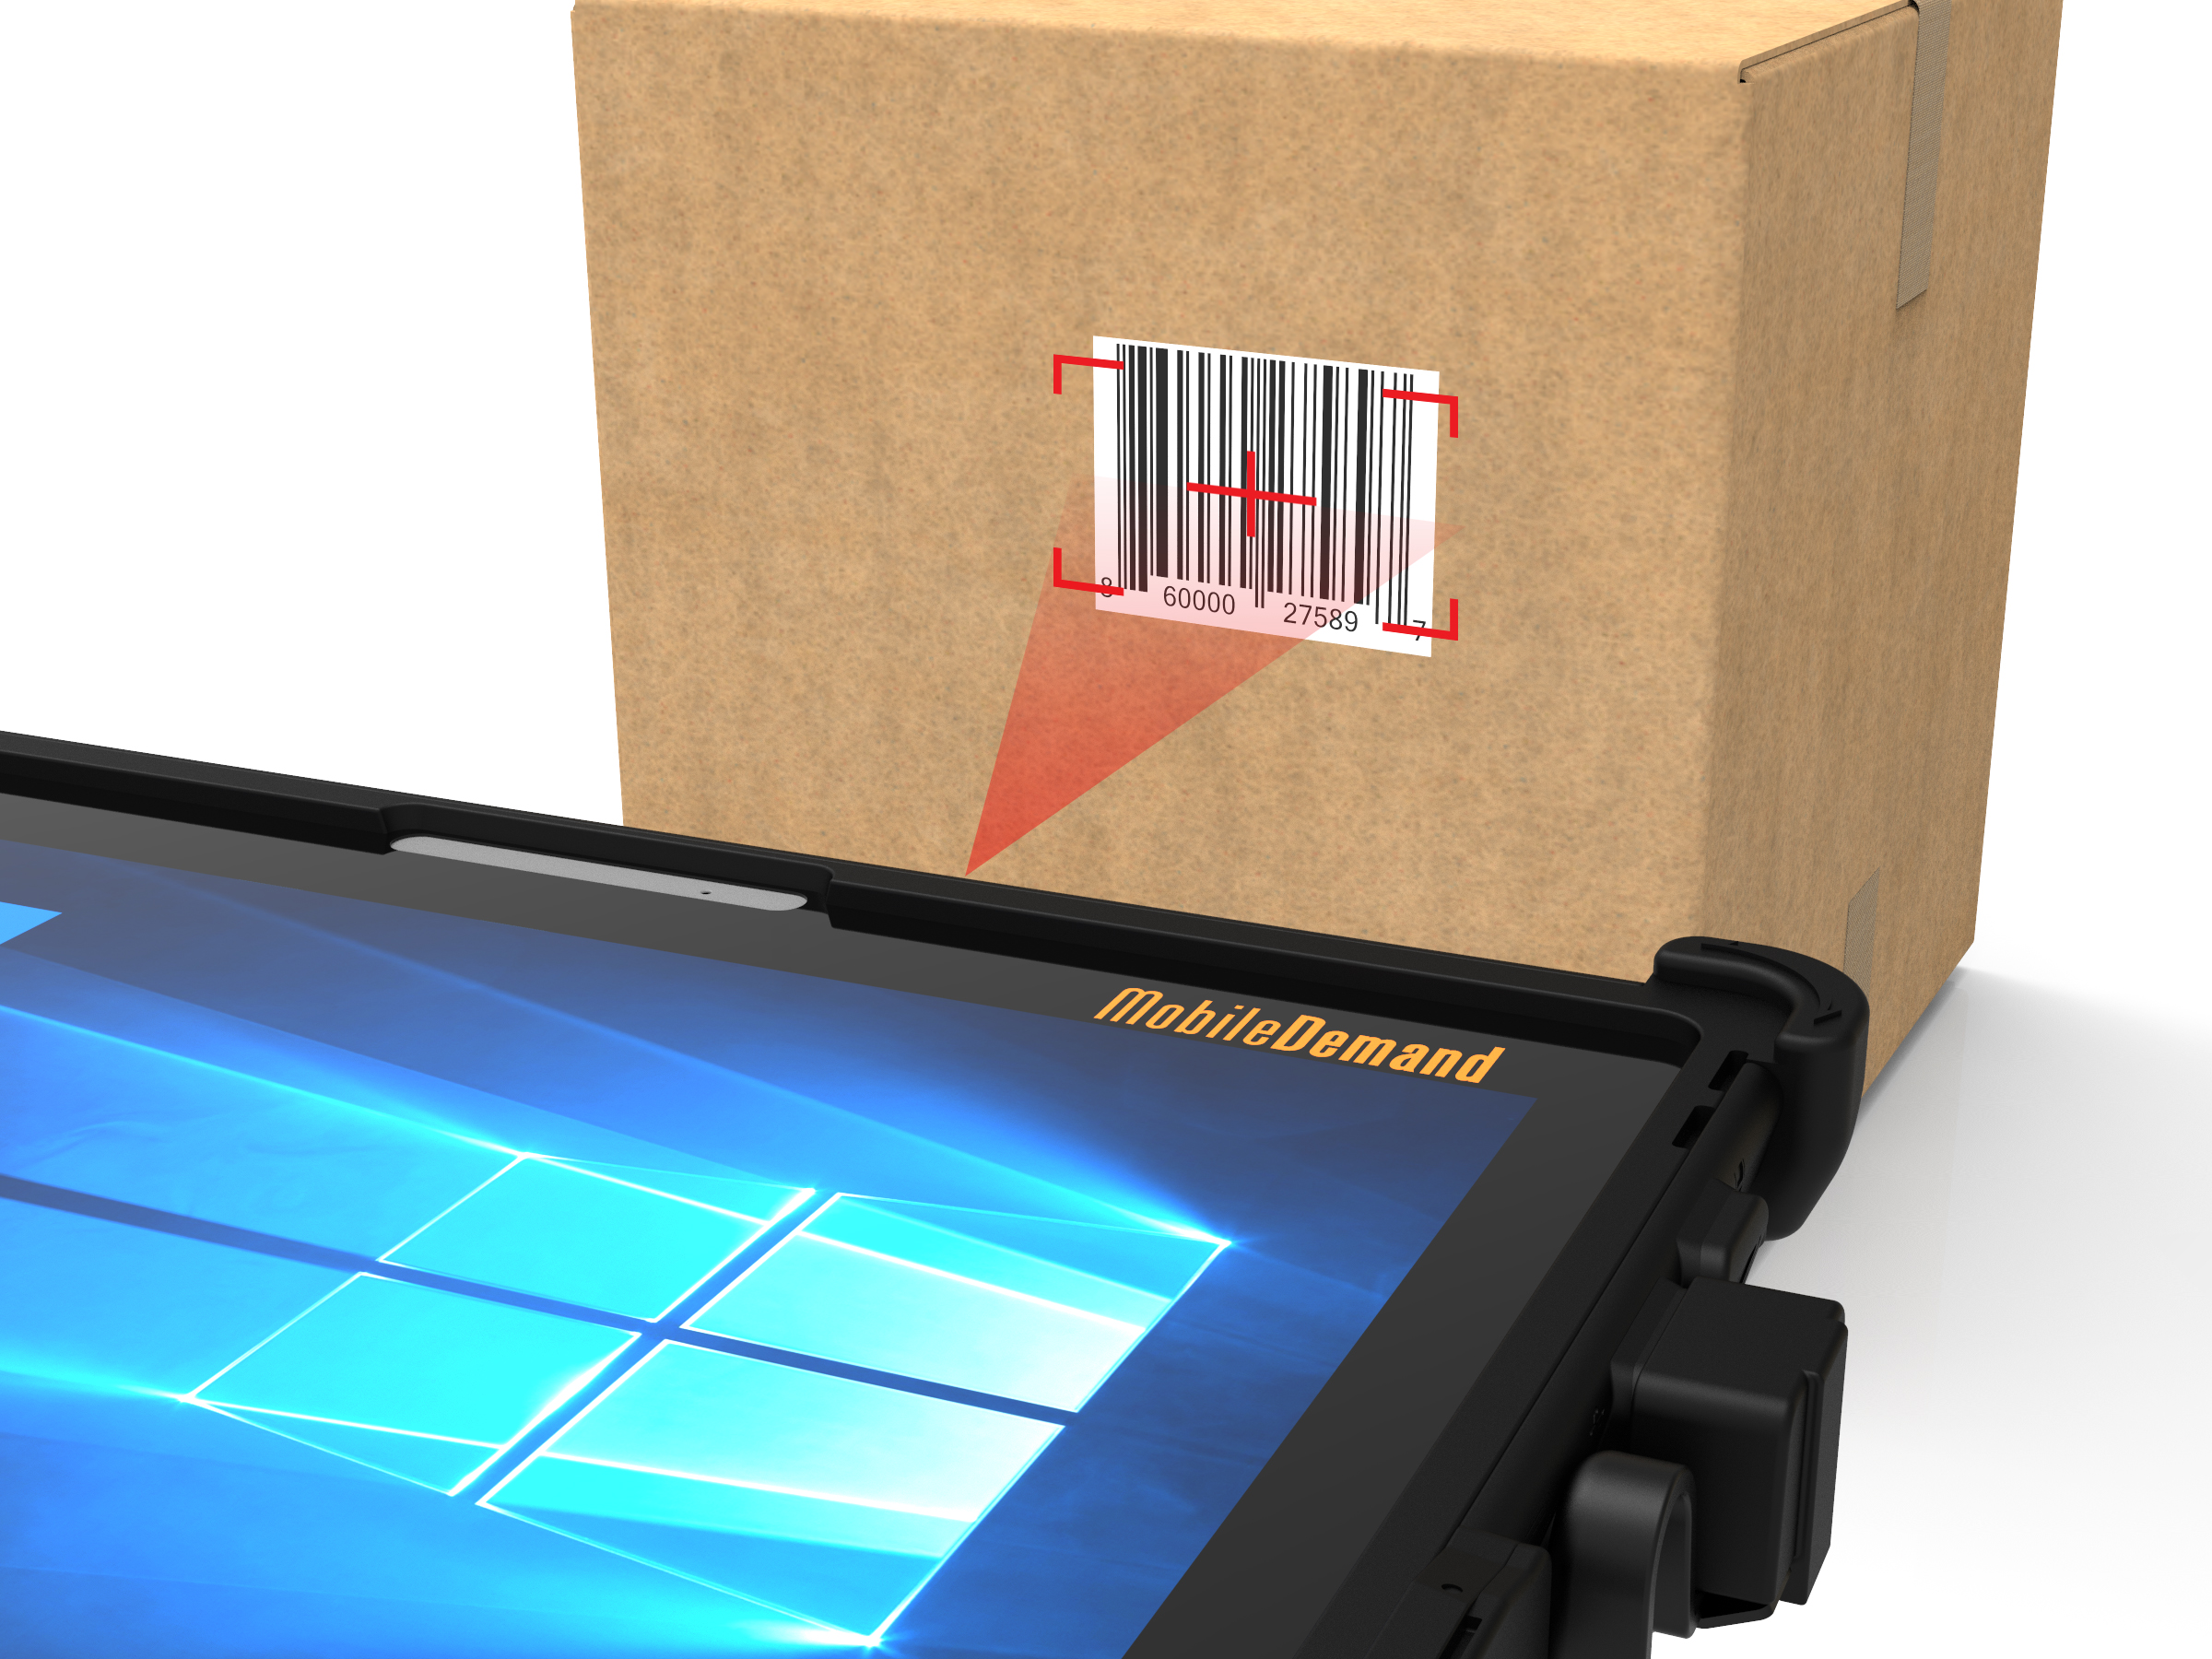 Microsoft Surface Pro and Surface Go Rugged Case with Barcode Scanning